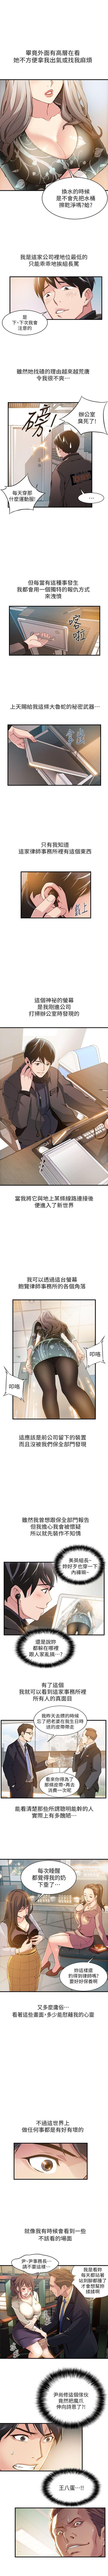 Spreading 弱點 1-101 官方中文（連載中） Action - Page 6